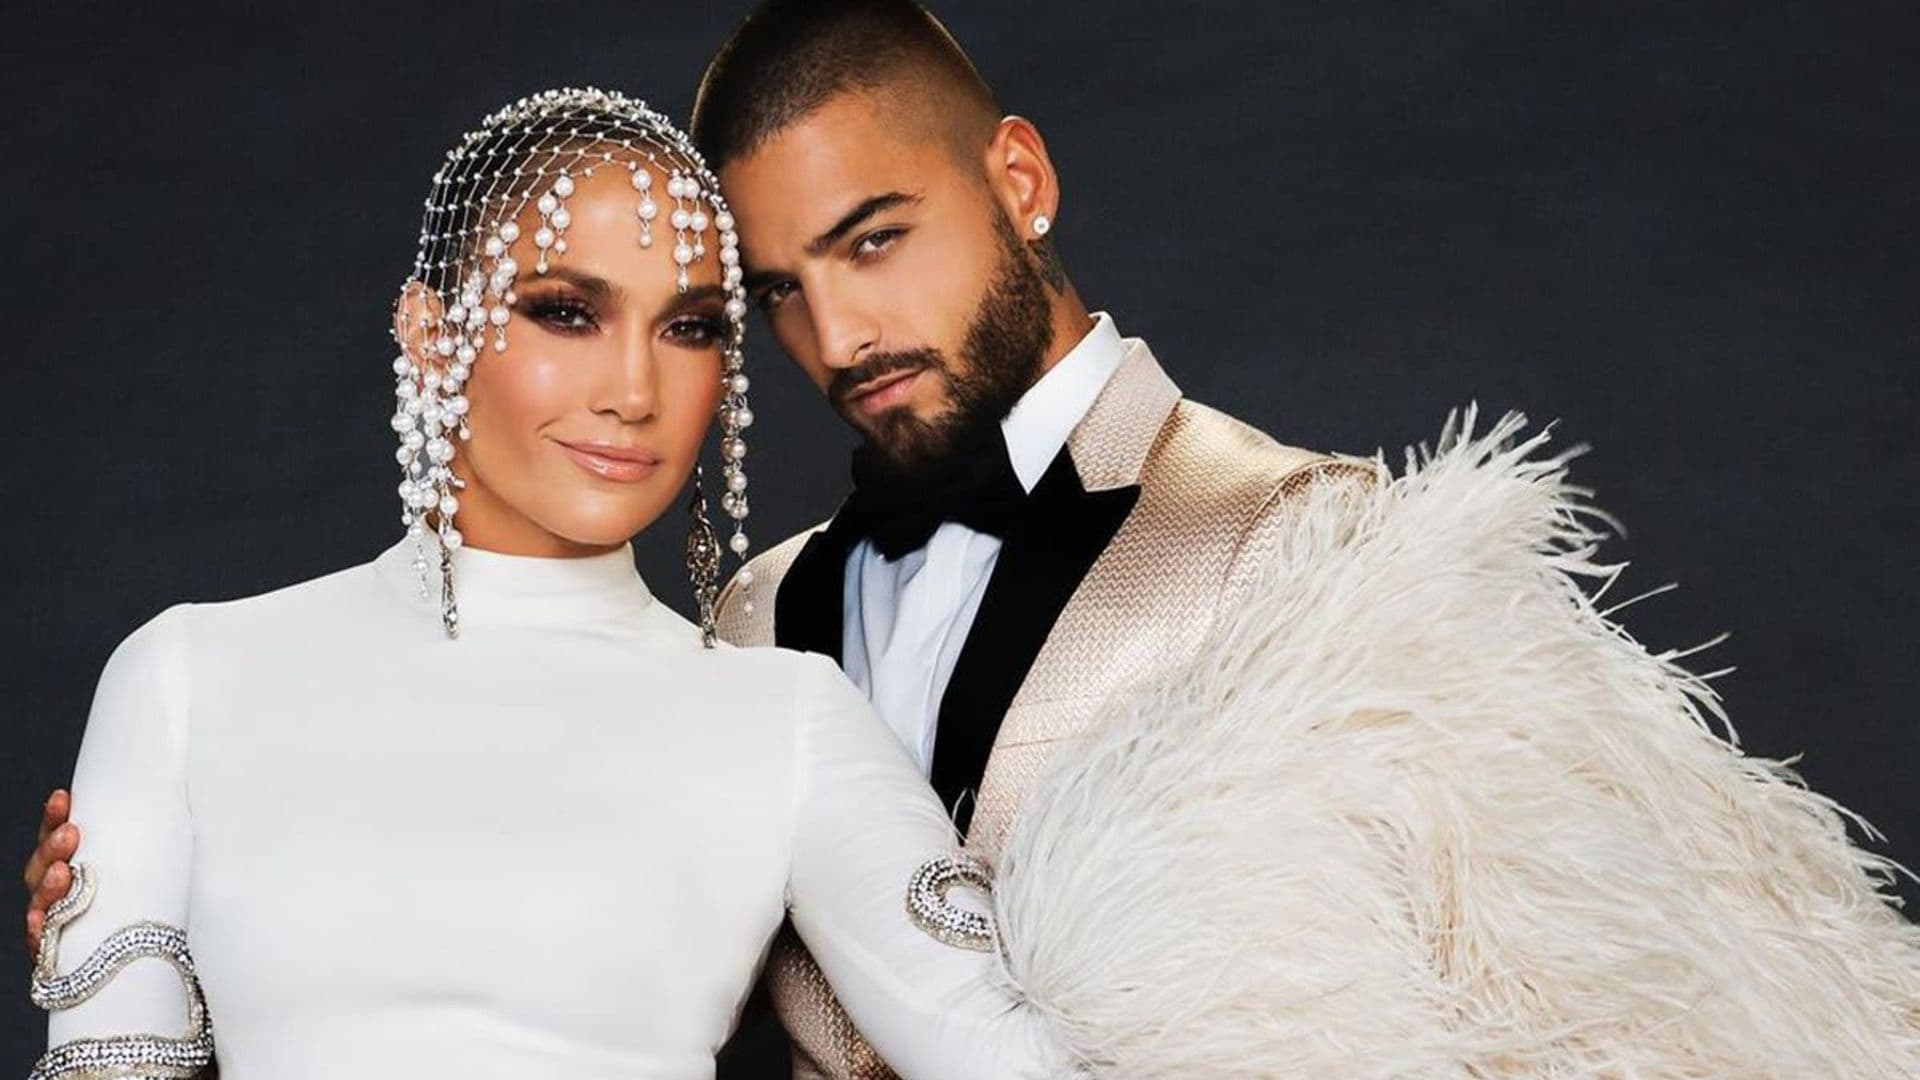 Jennifer Lopez and Maluma are hosting a virtual concert and fans can join using their Bitmoji